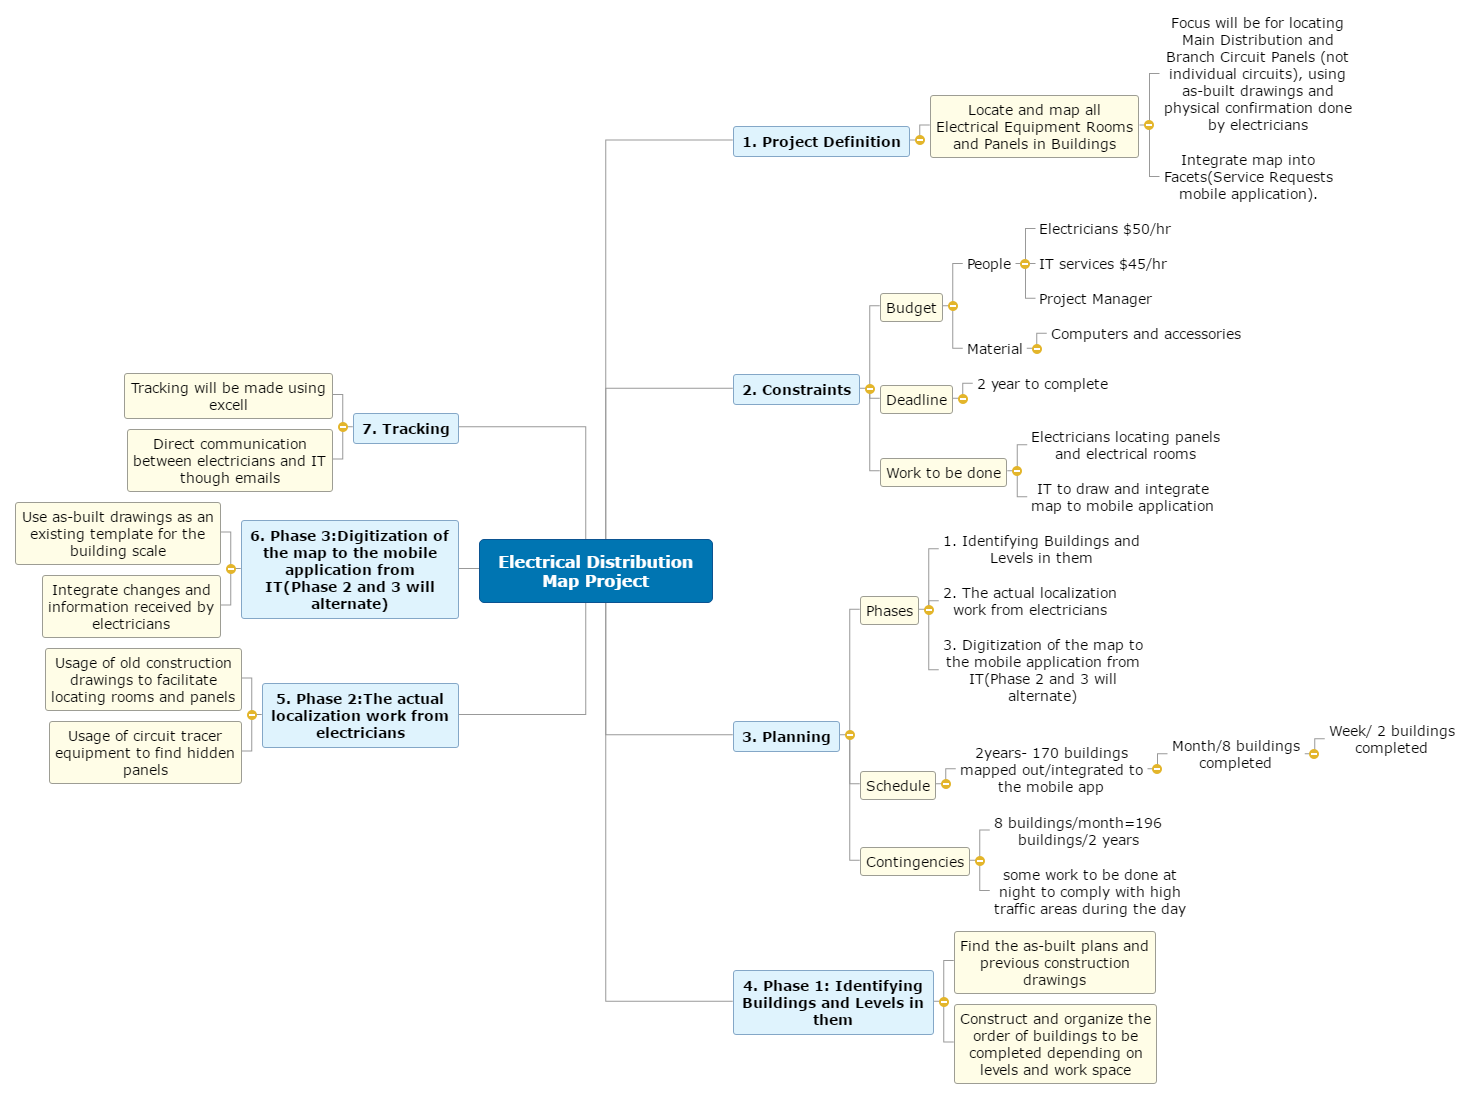 Electrical Distribution Map Project Mind Map